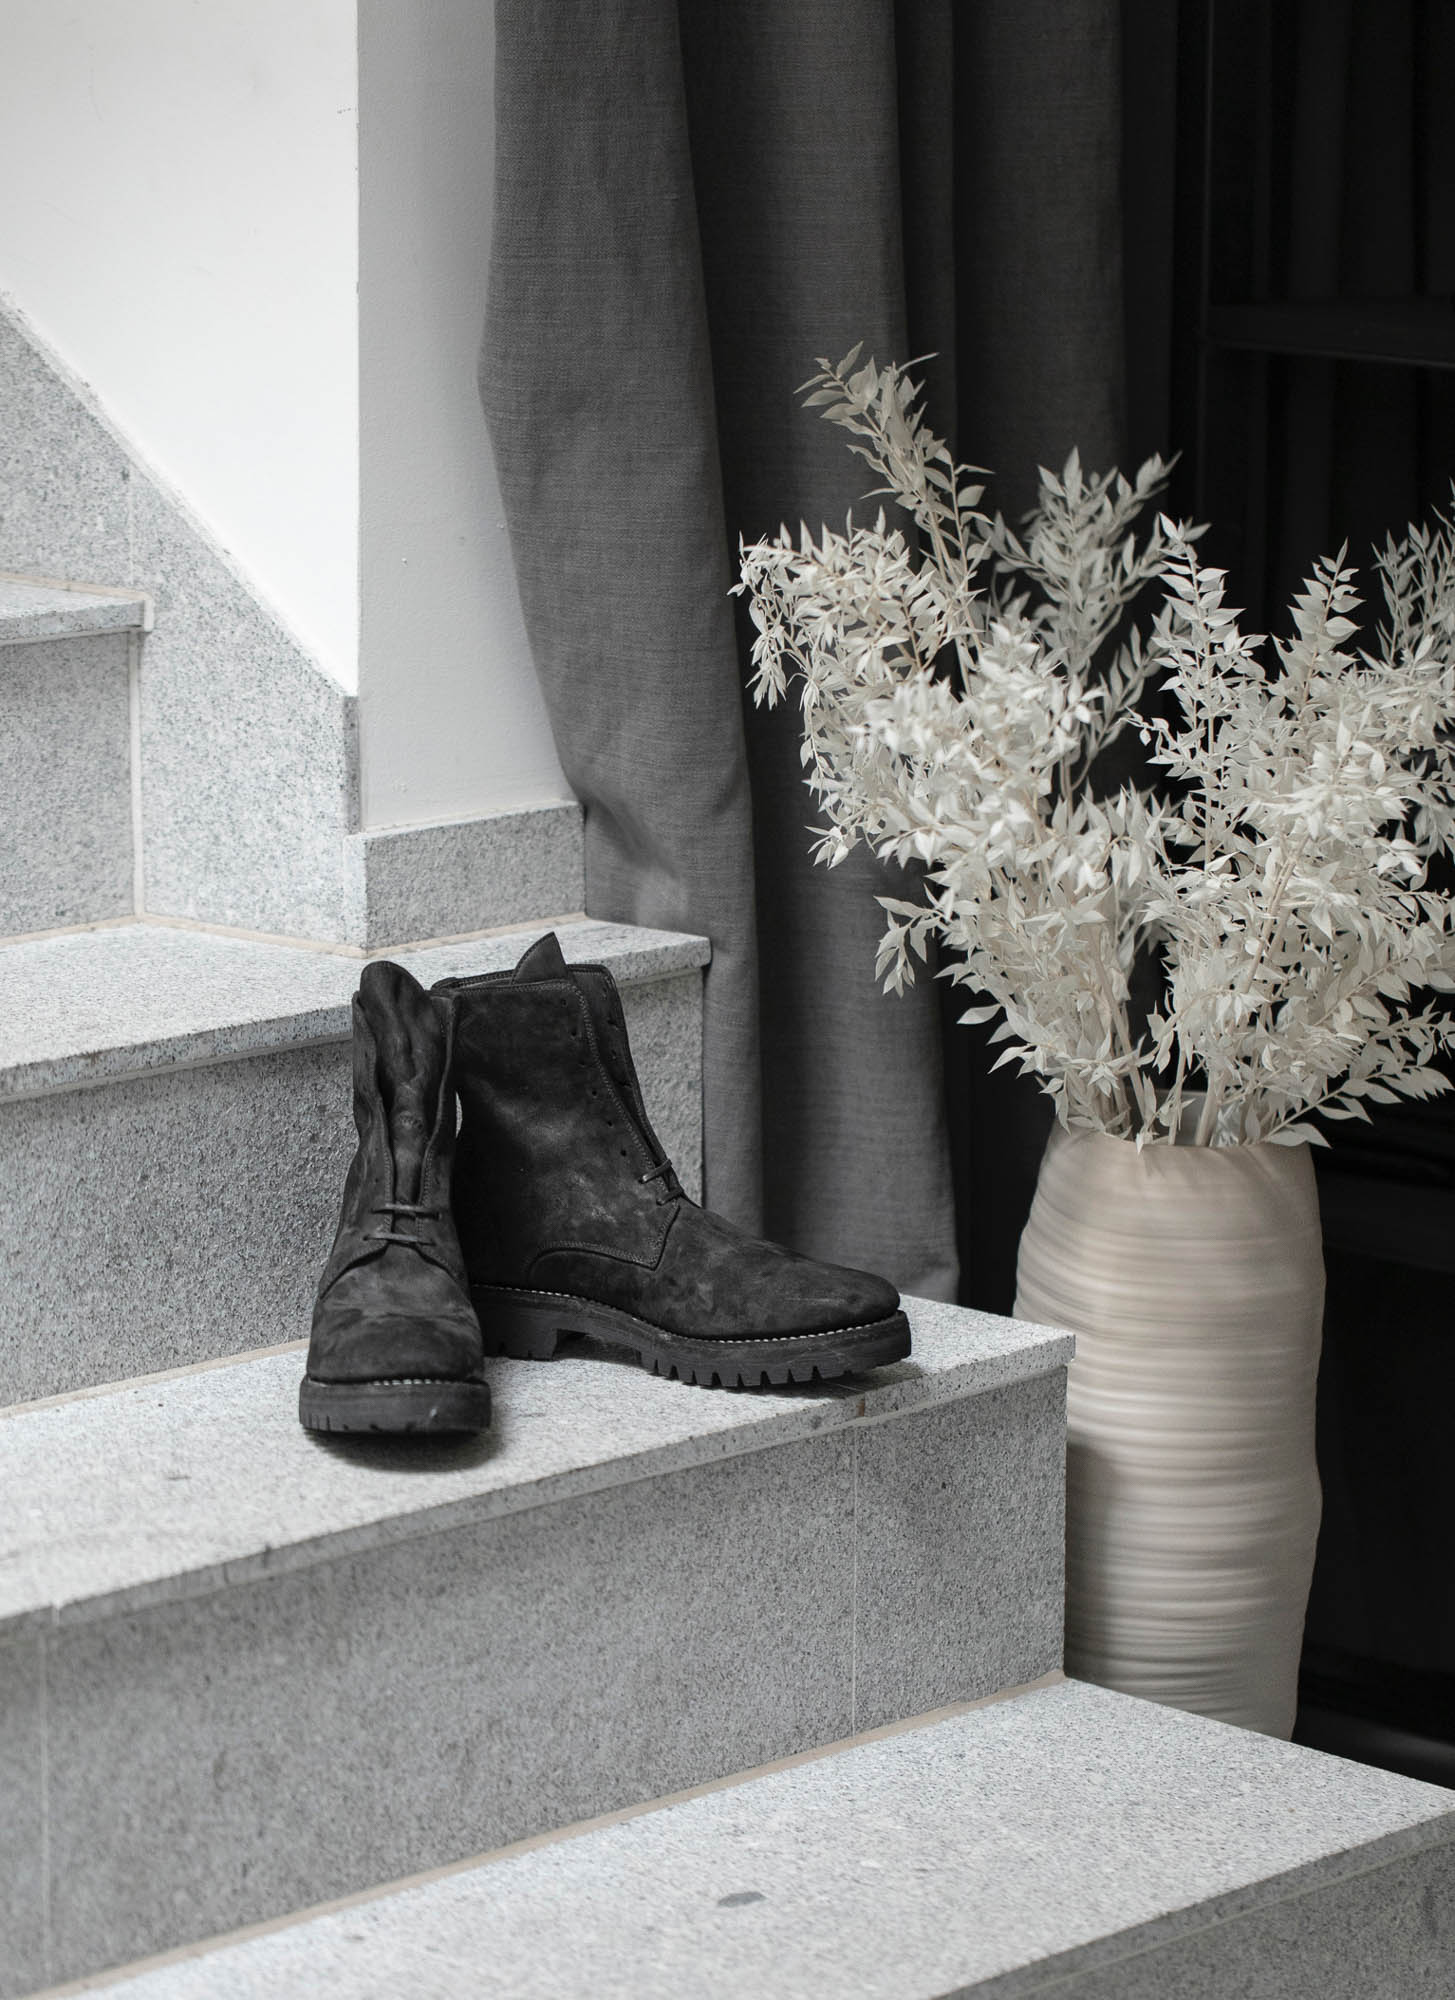 hide-m | GUIDI 795V Lace Up Boot With Vibram Sole, black horse leather